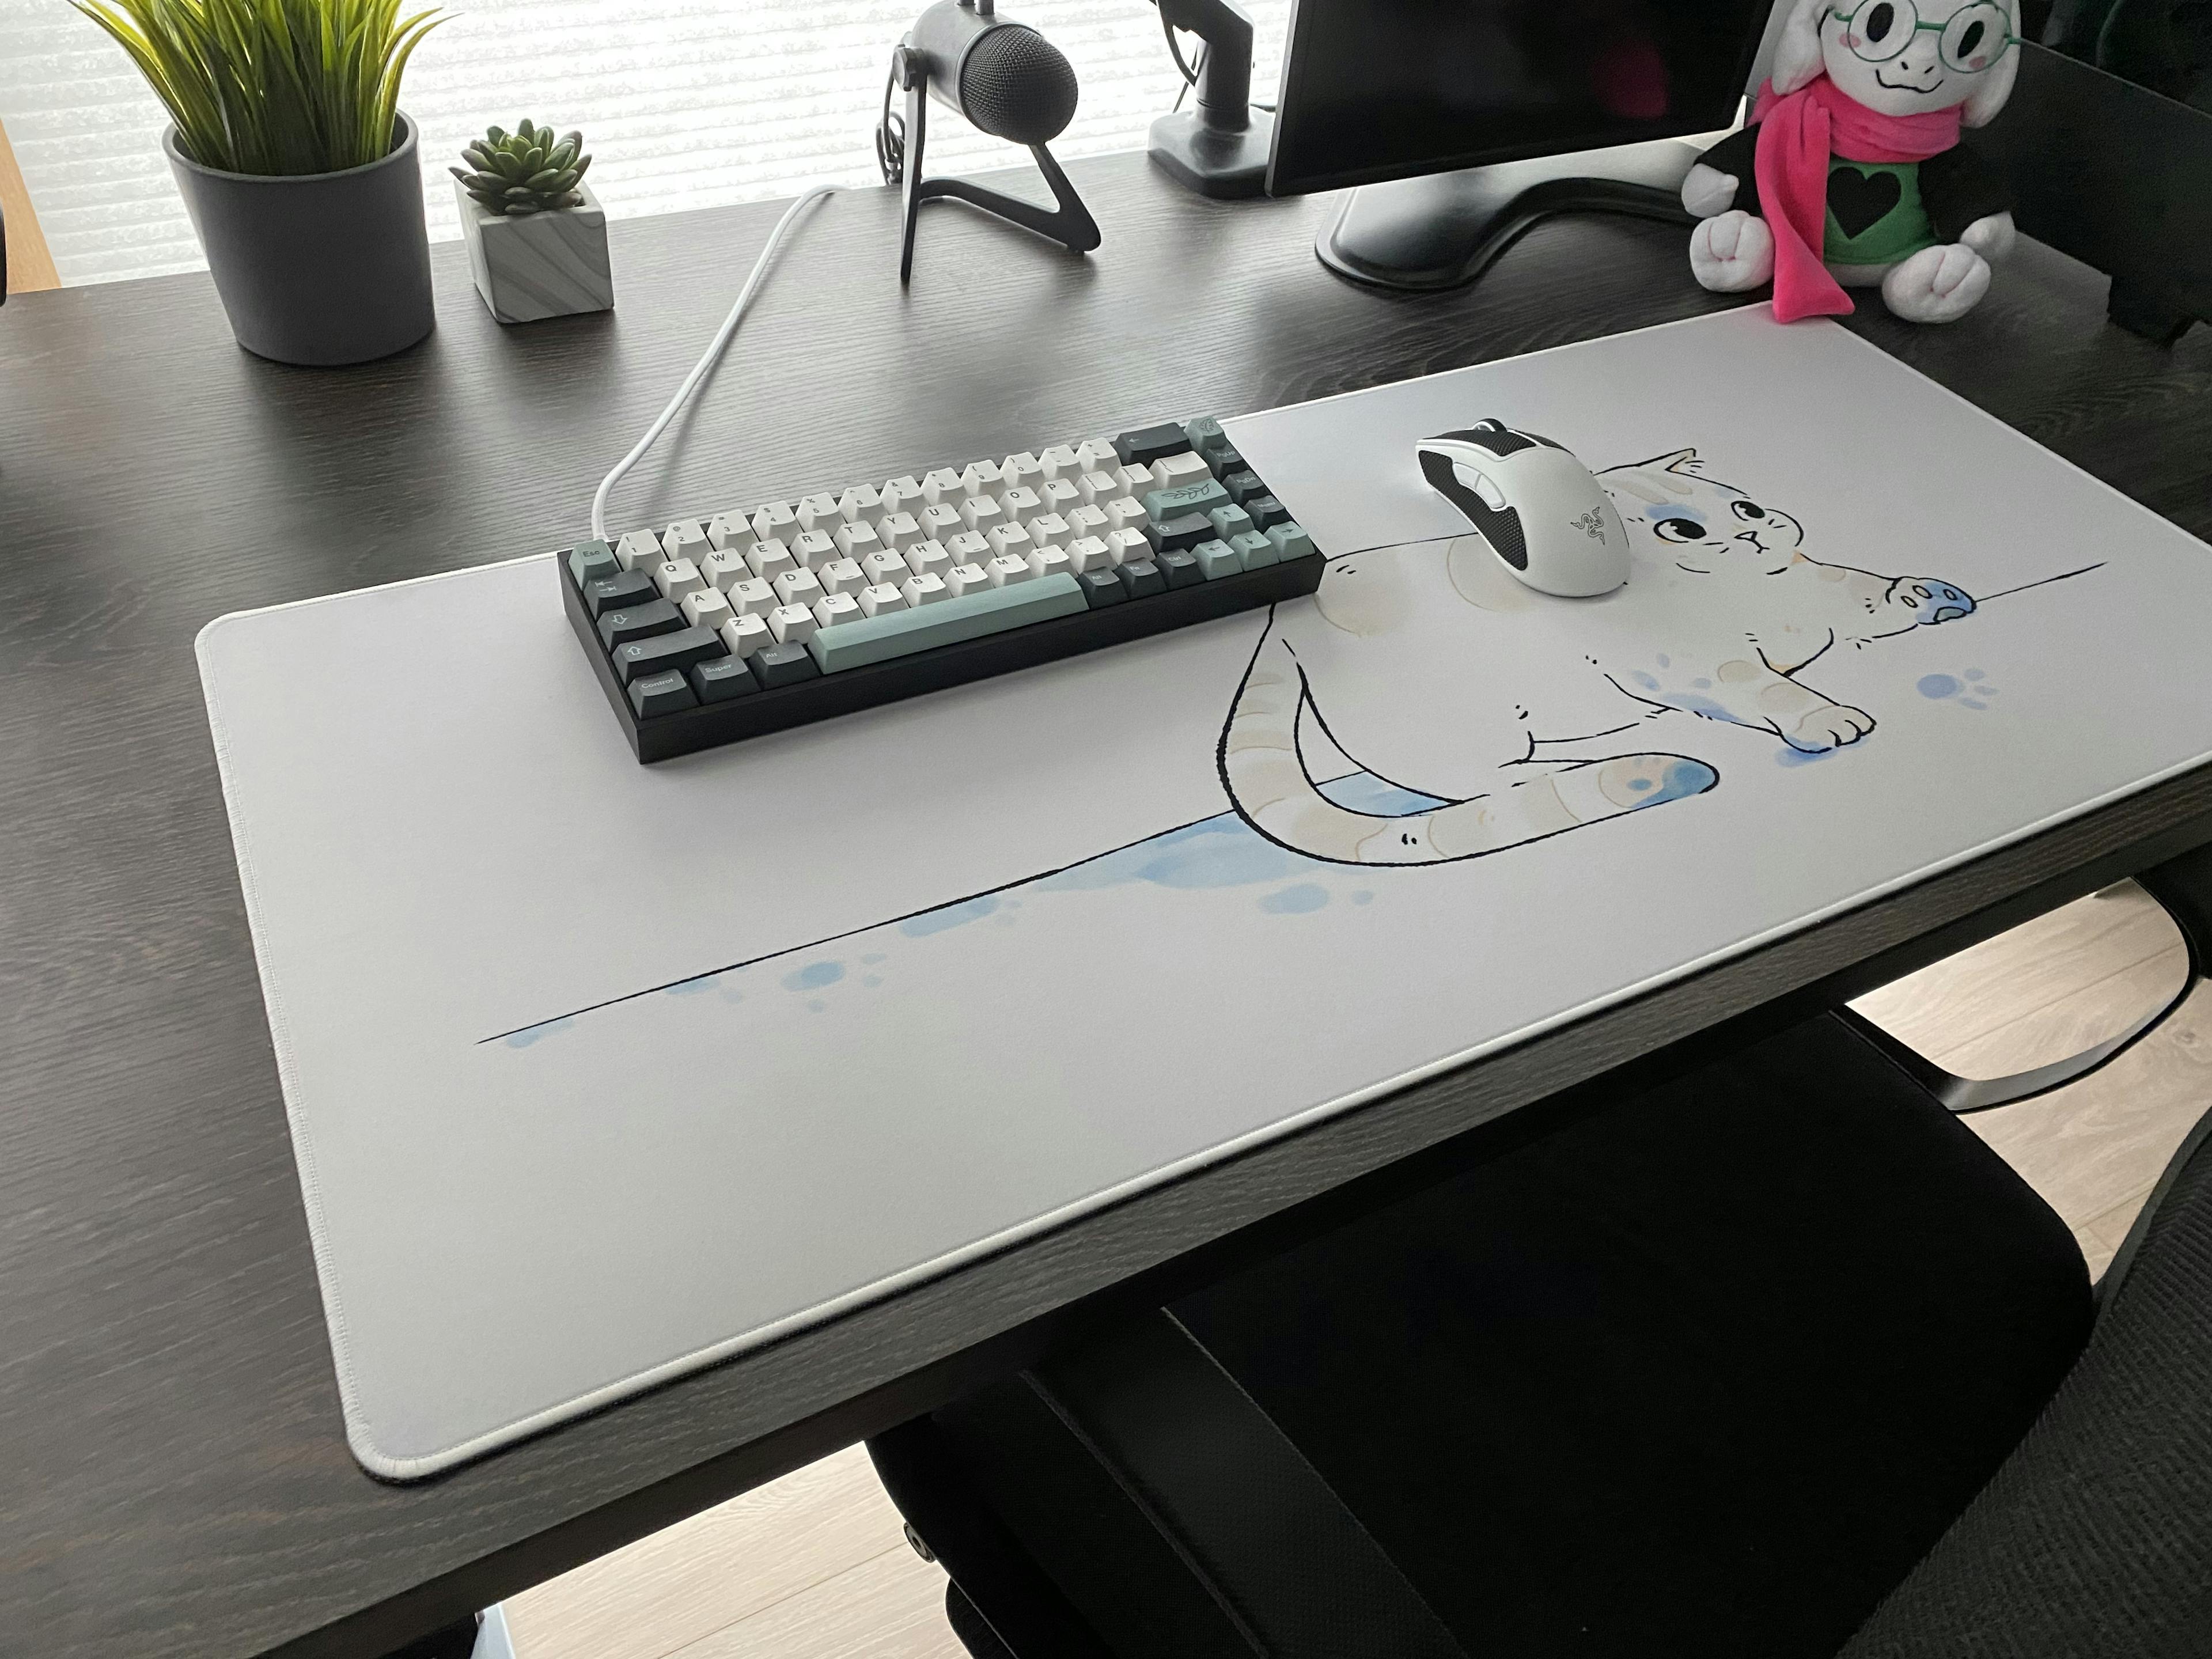 Review photo of deskmat by Adam